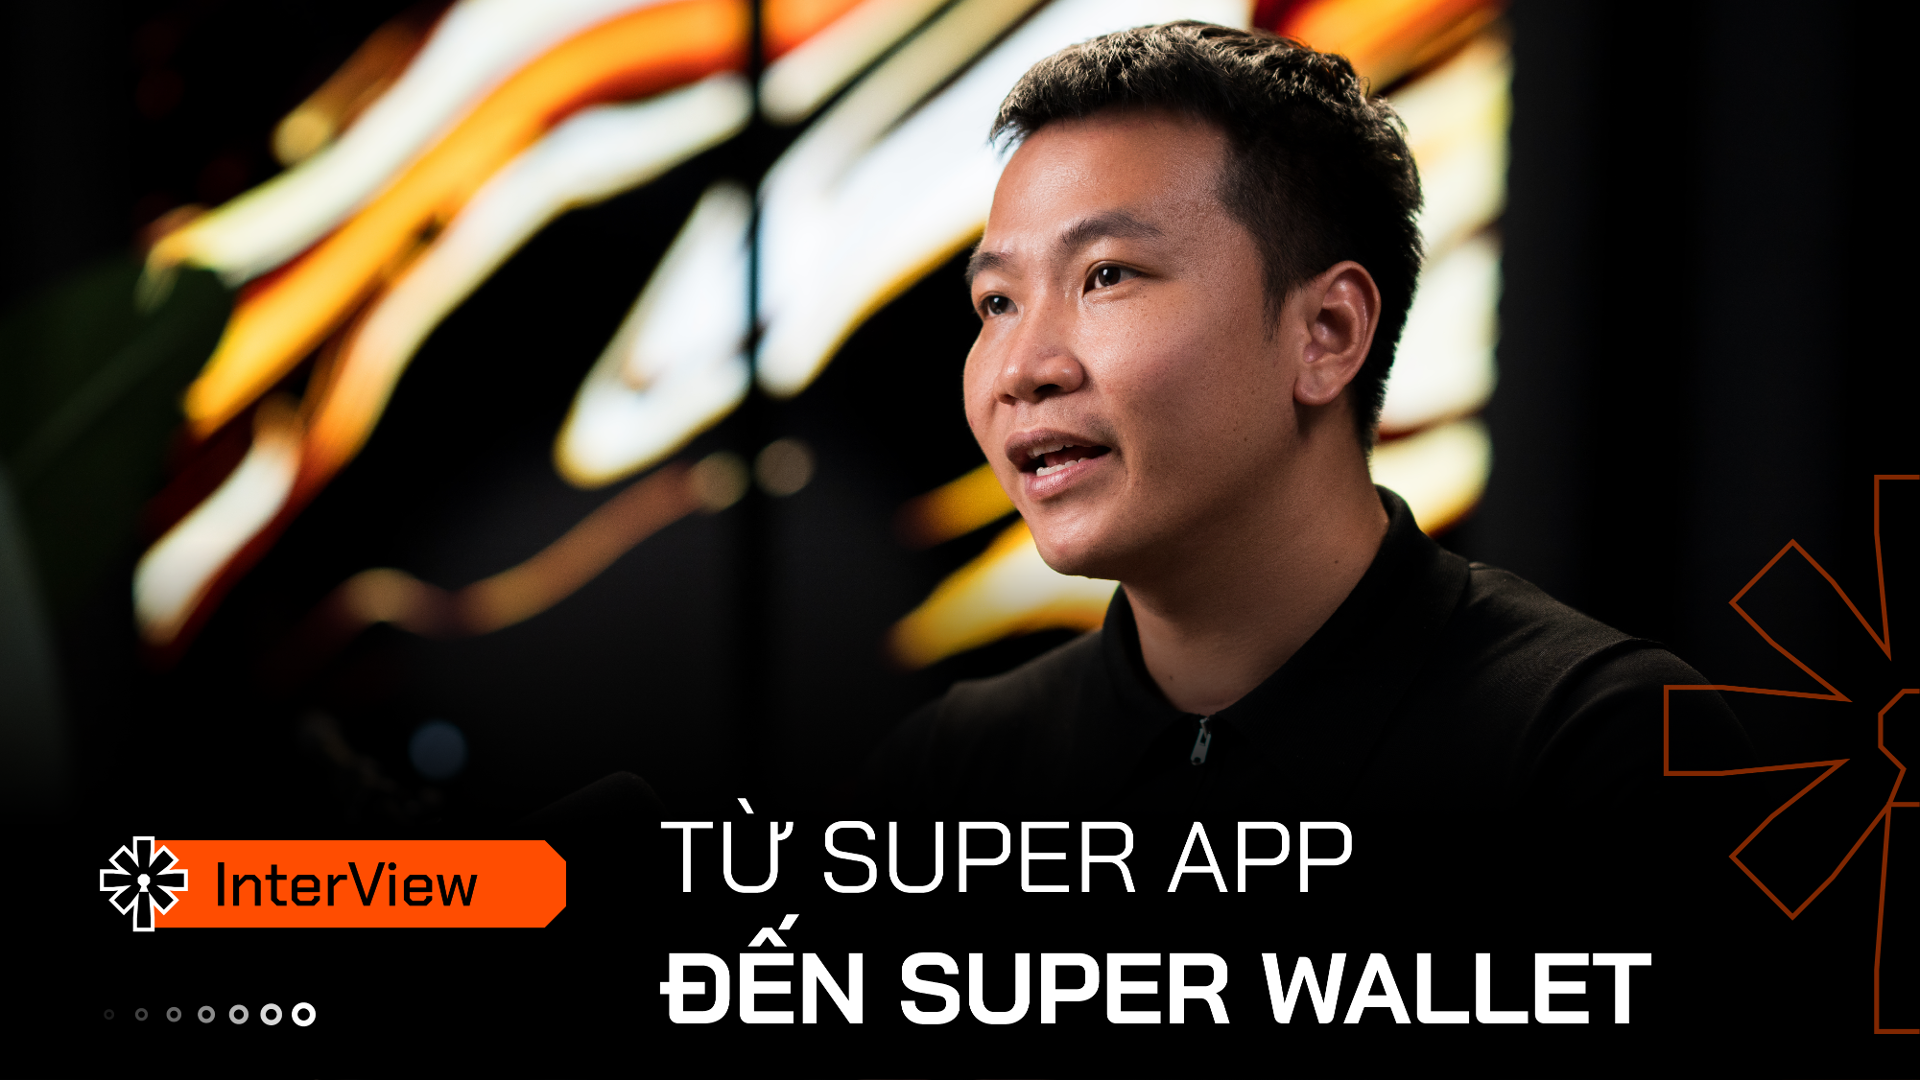 https://file.coin98.com/images/interview-super-app-wallet-cover-tBuaOflQINfpAPwY.png